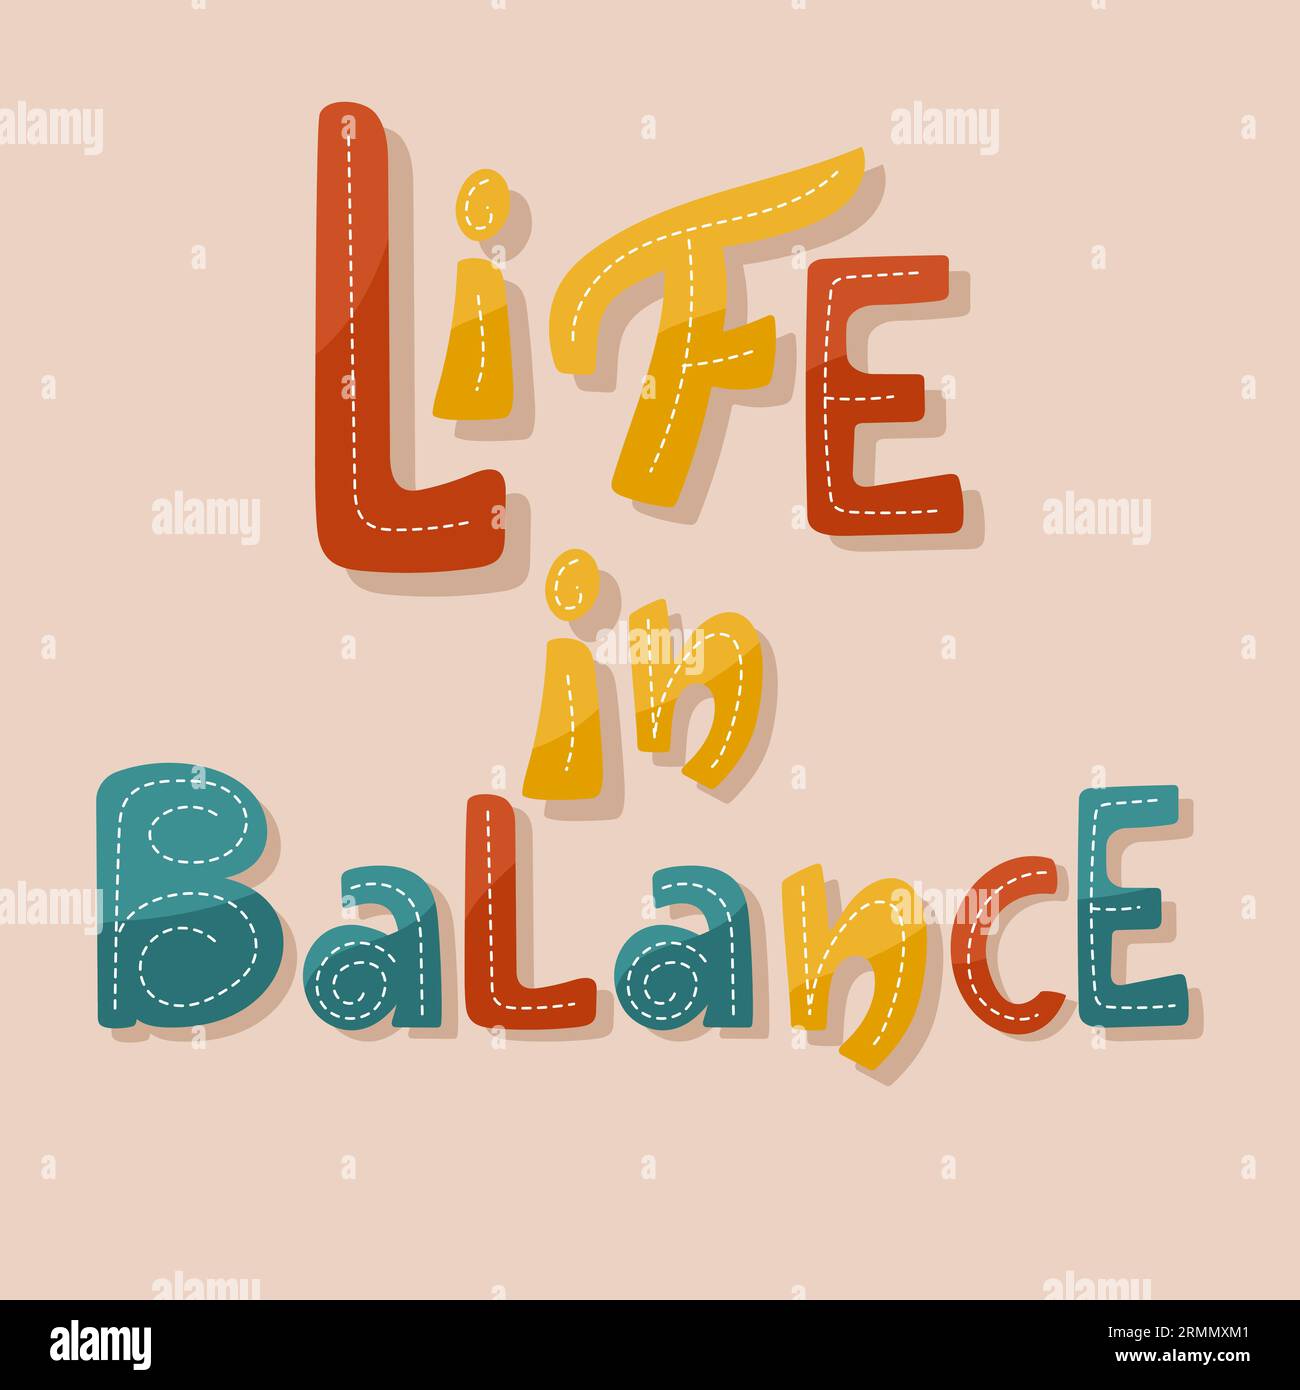 Life in balance lettering poster.  Stock Vector